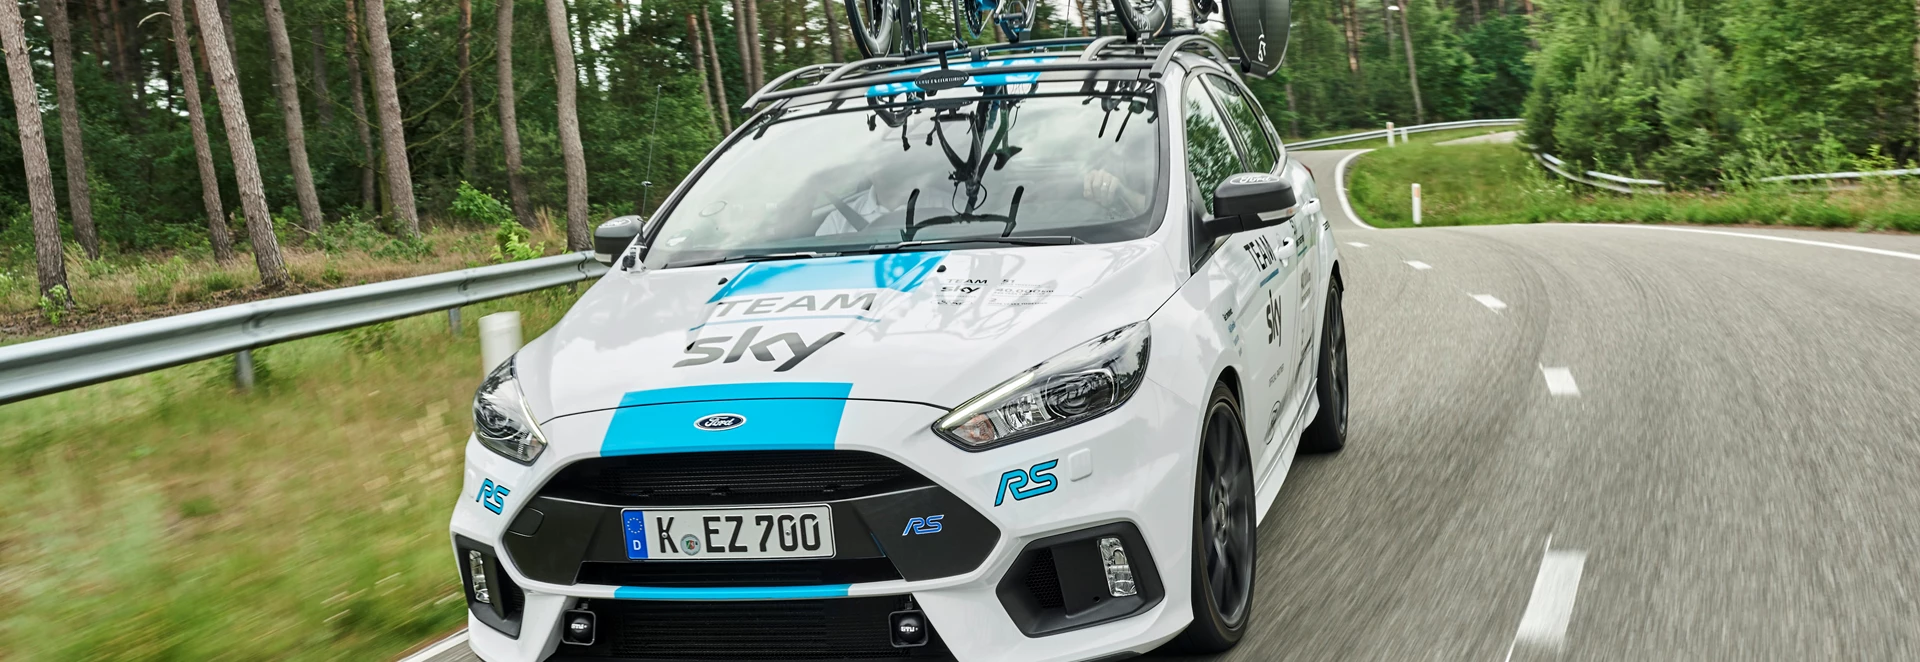 Ford unleashes special Focus RS for 2017 Tour De France 